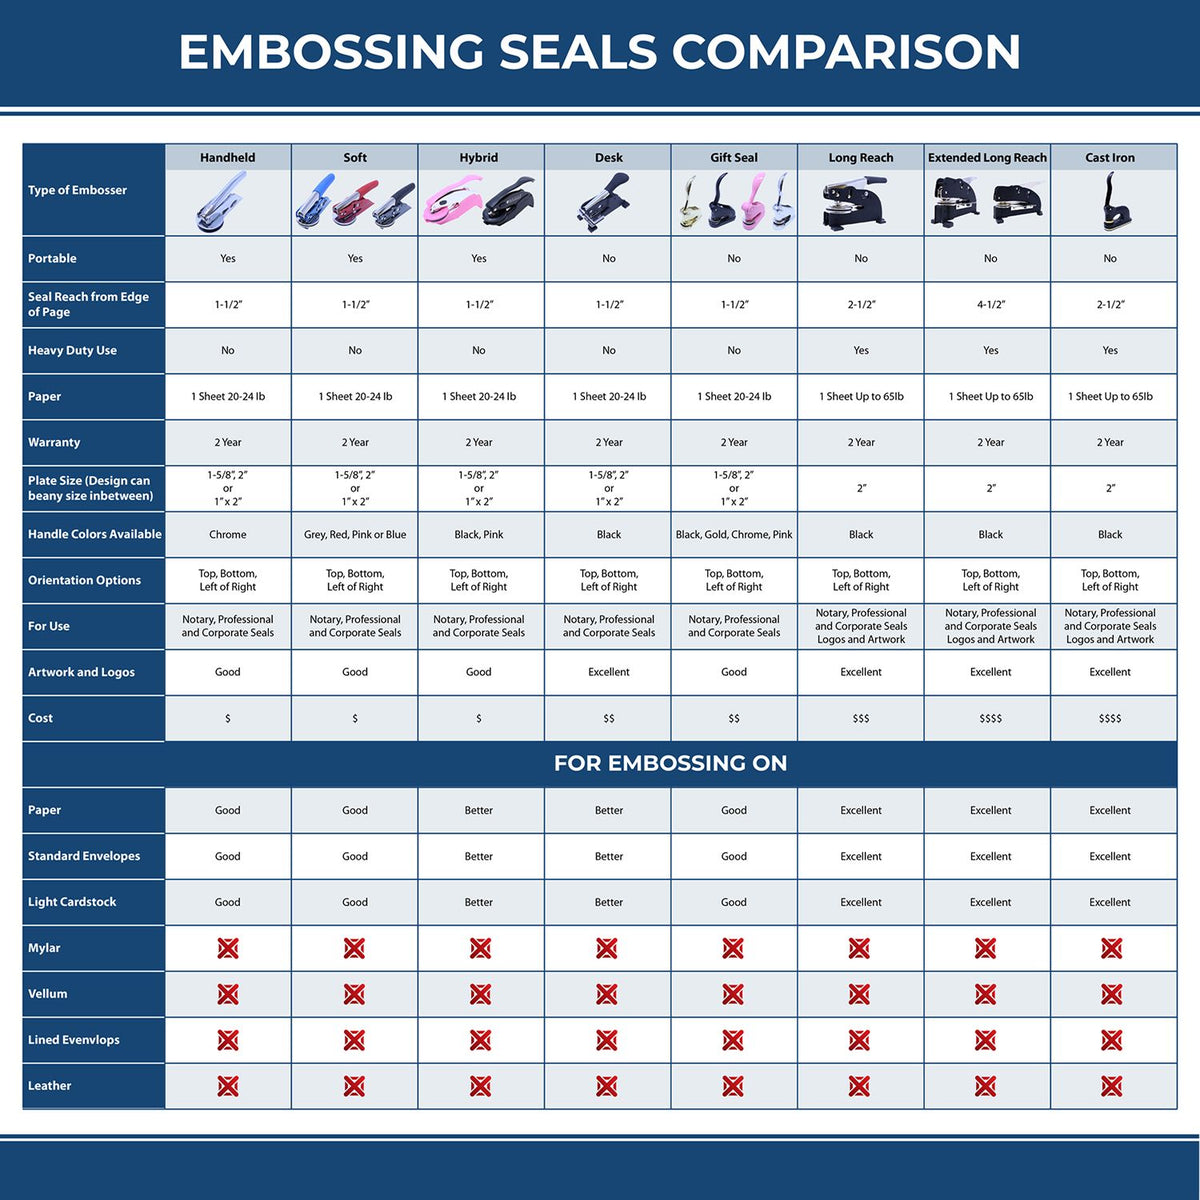 A comparison chart for the different types of mount models available for the State of Kansas Soft Land Surveyor Embossing Seal.